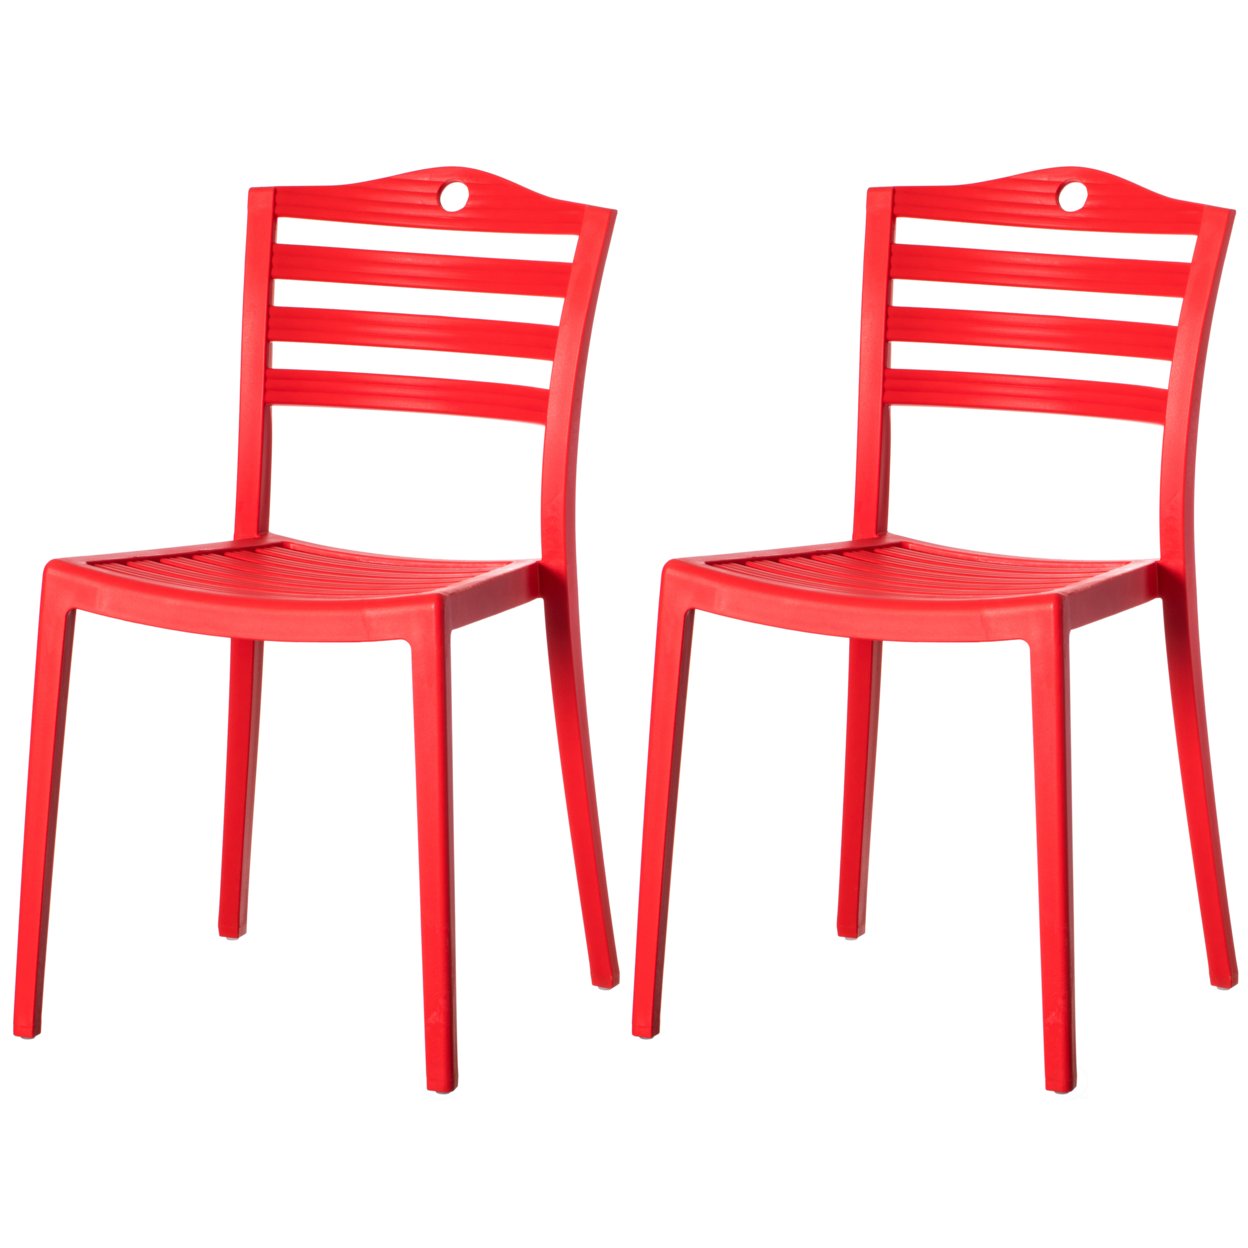 Stackable Modern Plastic Indoor And Outdoor Dining Chair With Ladderback Design For All Weather Use - Set Of 2 Red